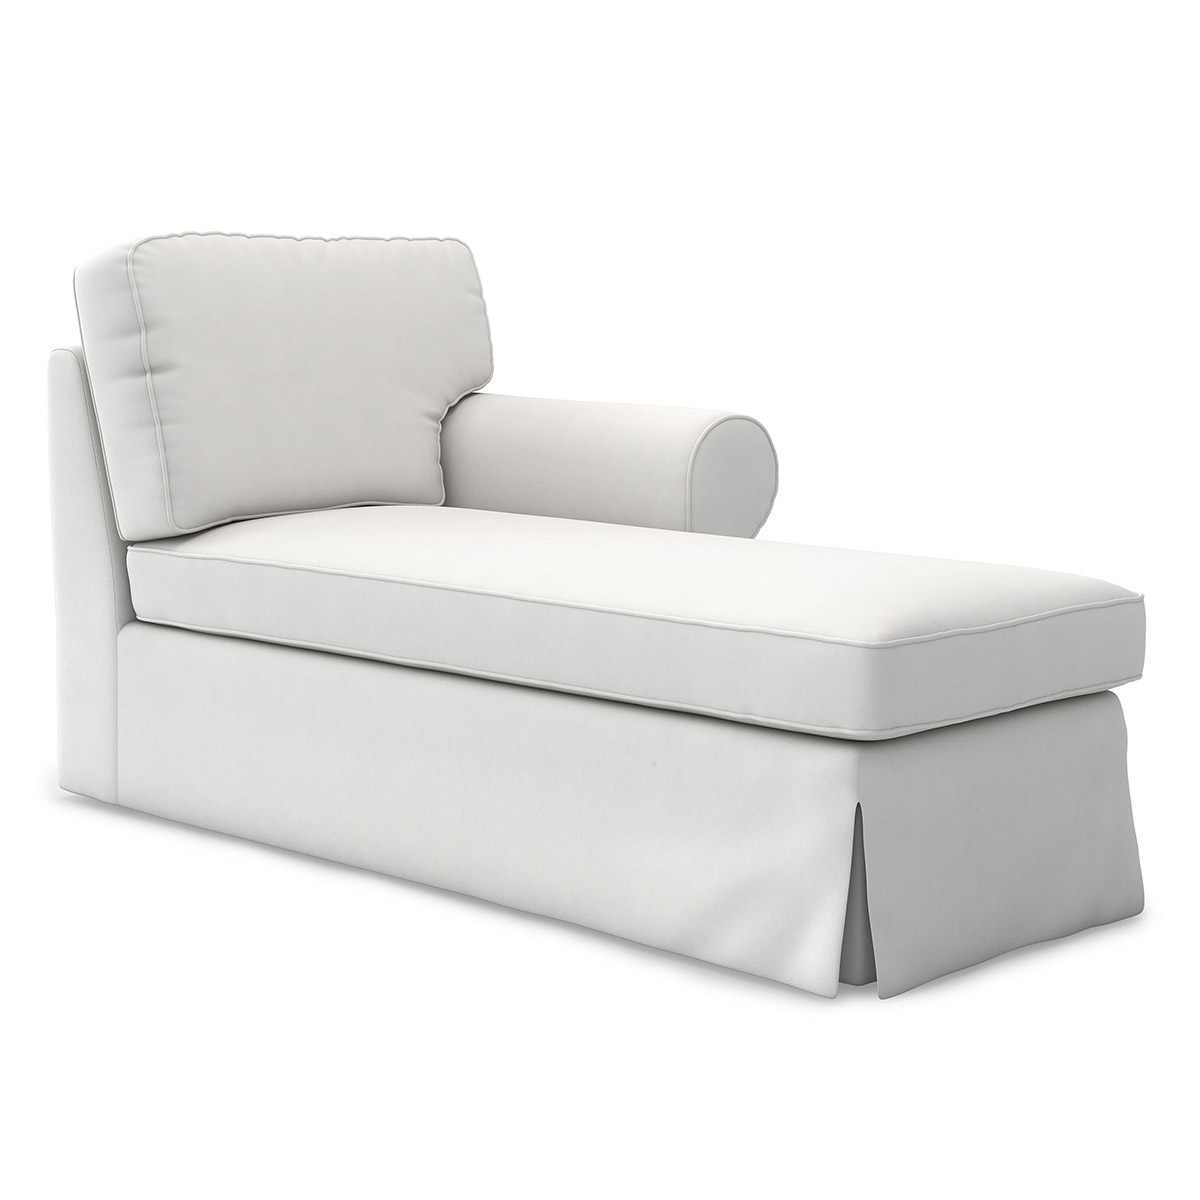 Ektorp Chaise Lounge Right Cover